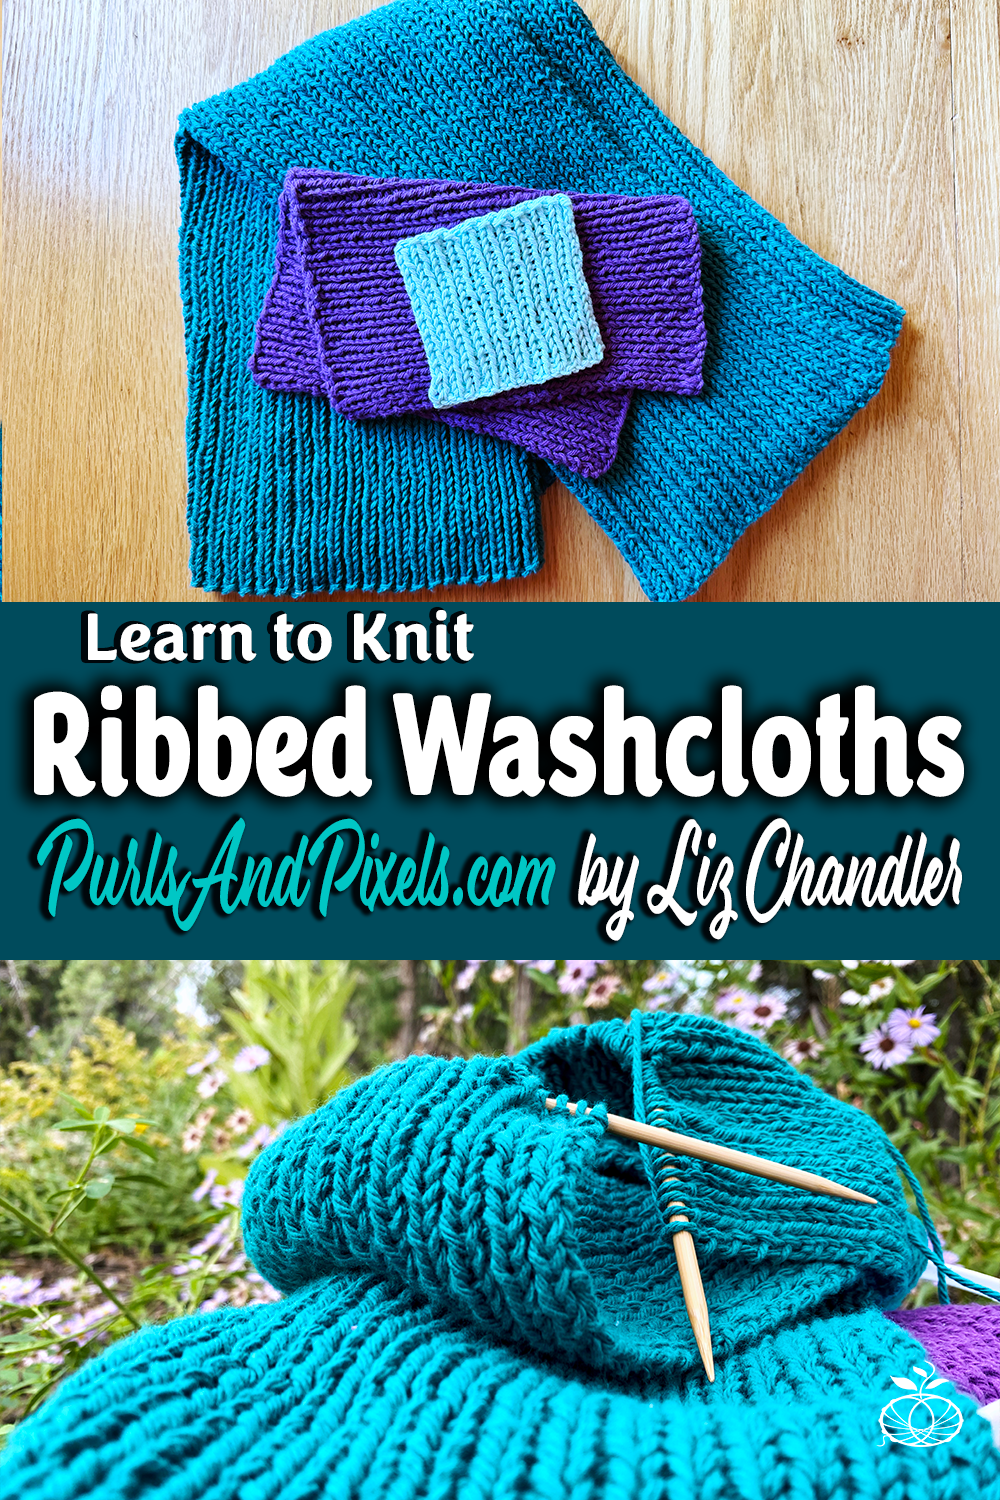 Learn to knit ribbed face scrubbies, waschloths, and hand towels with this knitting pattern from Liz Chandler @PurlsAndPixels.